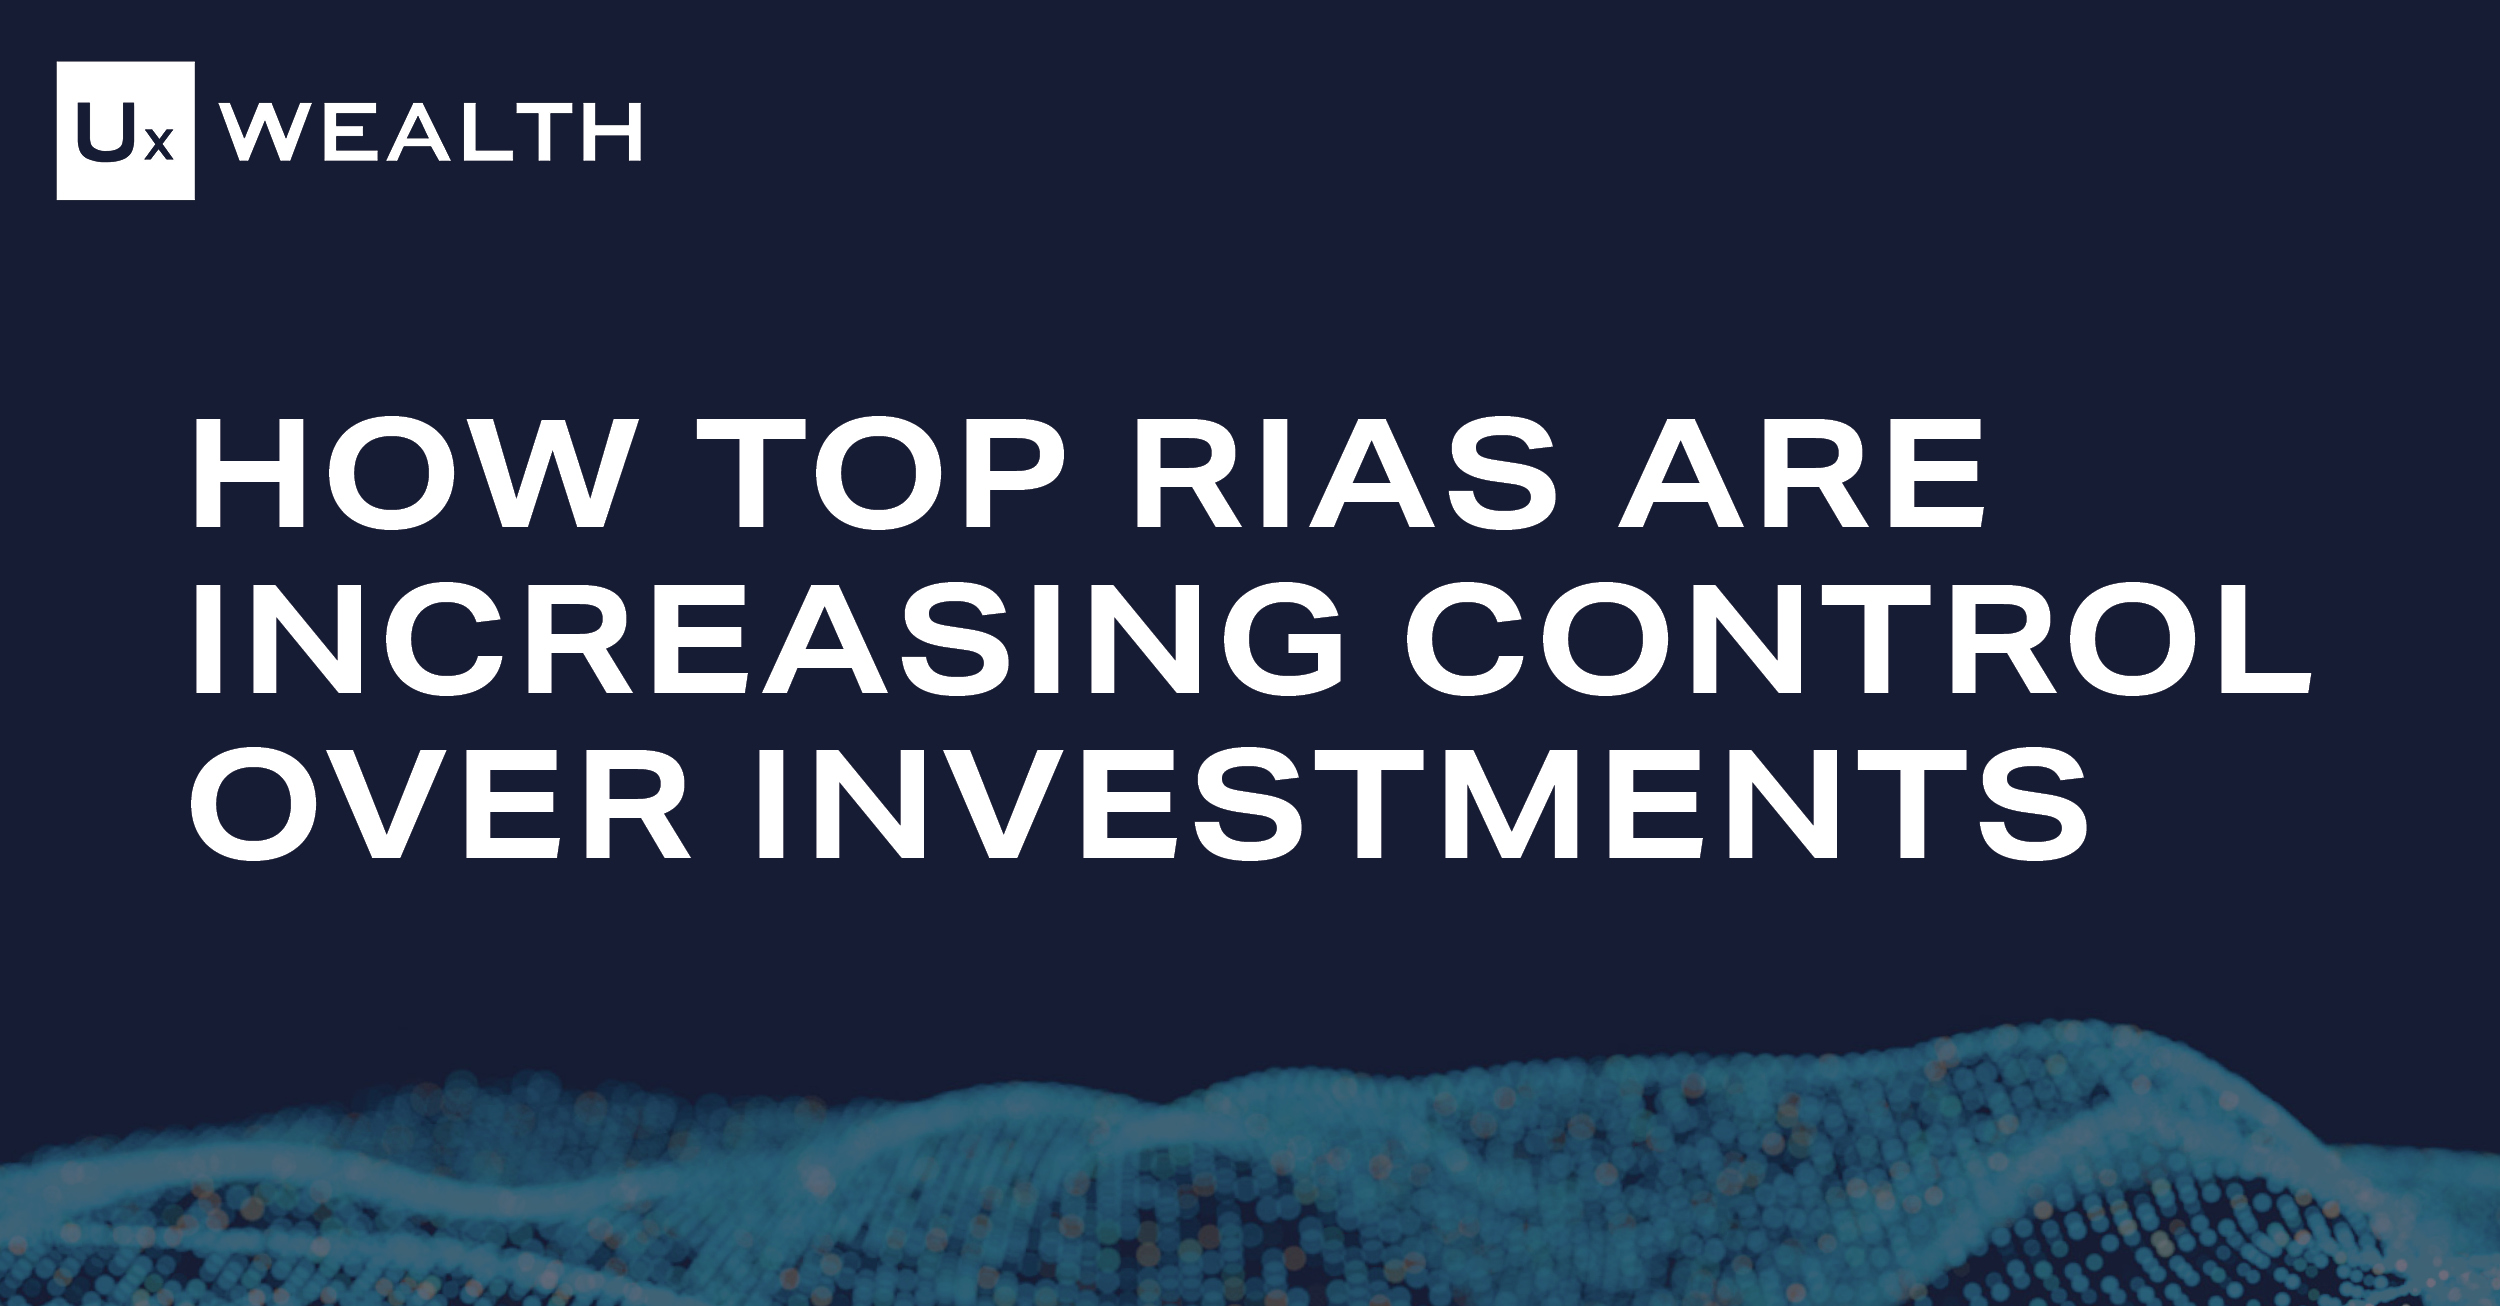 How Top RIAs Are Increasing Control Over Investments